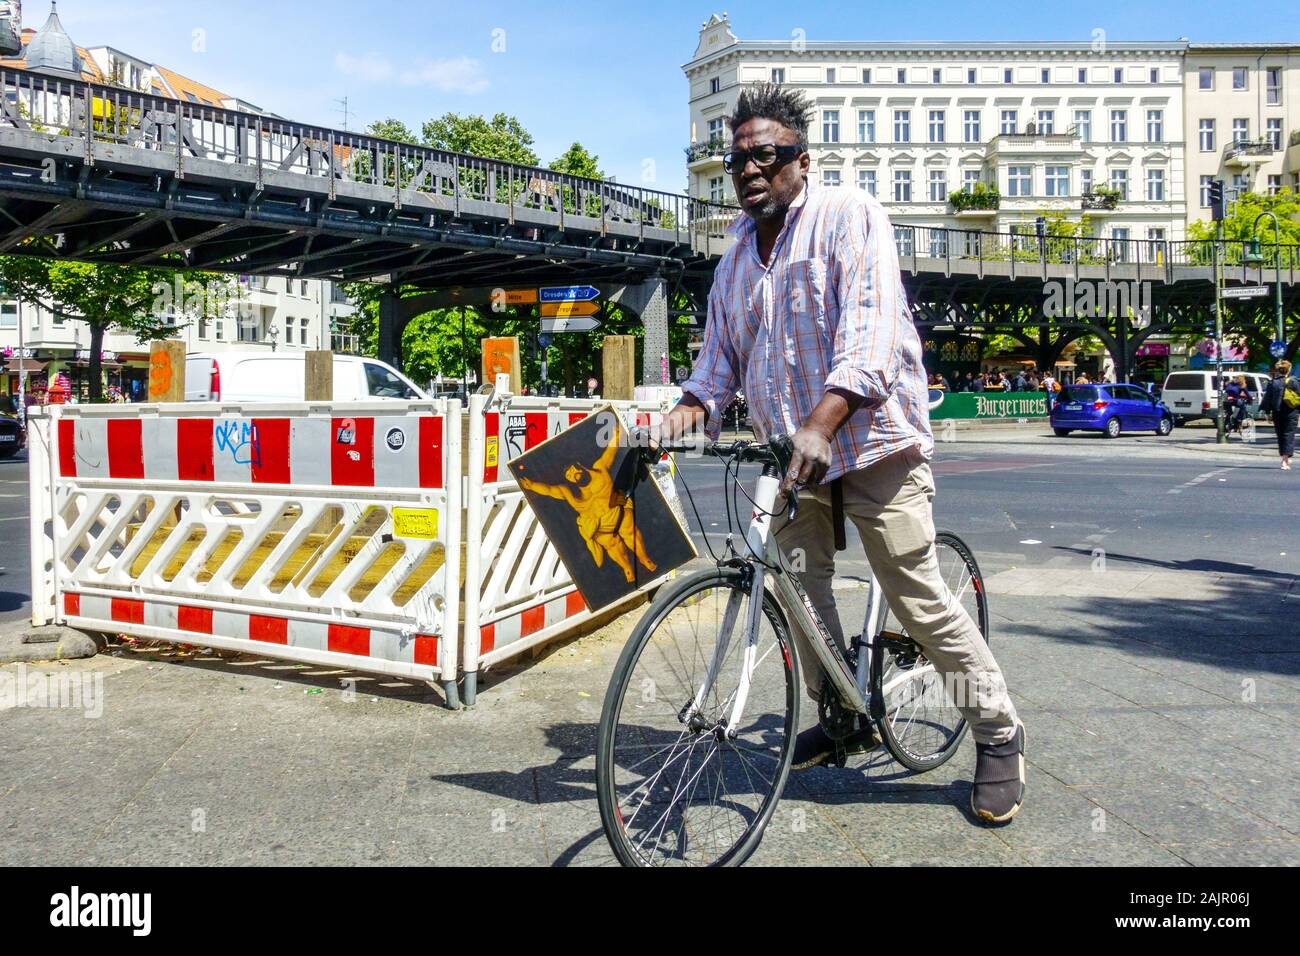 Germany Berlin Kreuzberg Daily Life, Man on a bike with a picture of fat Jesus Schlesisches Tor, Berlin City people Afro American man Stock Photo